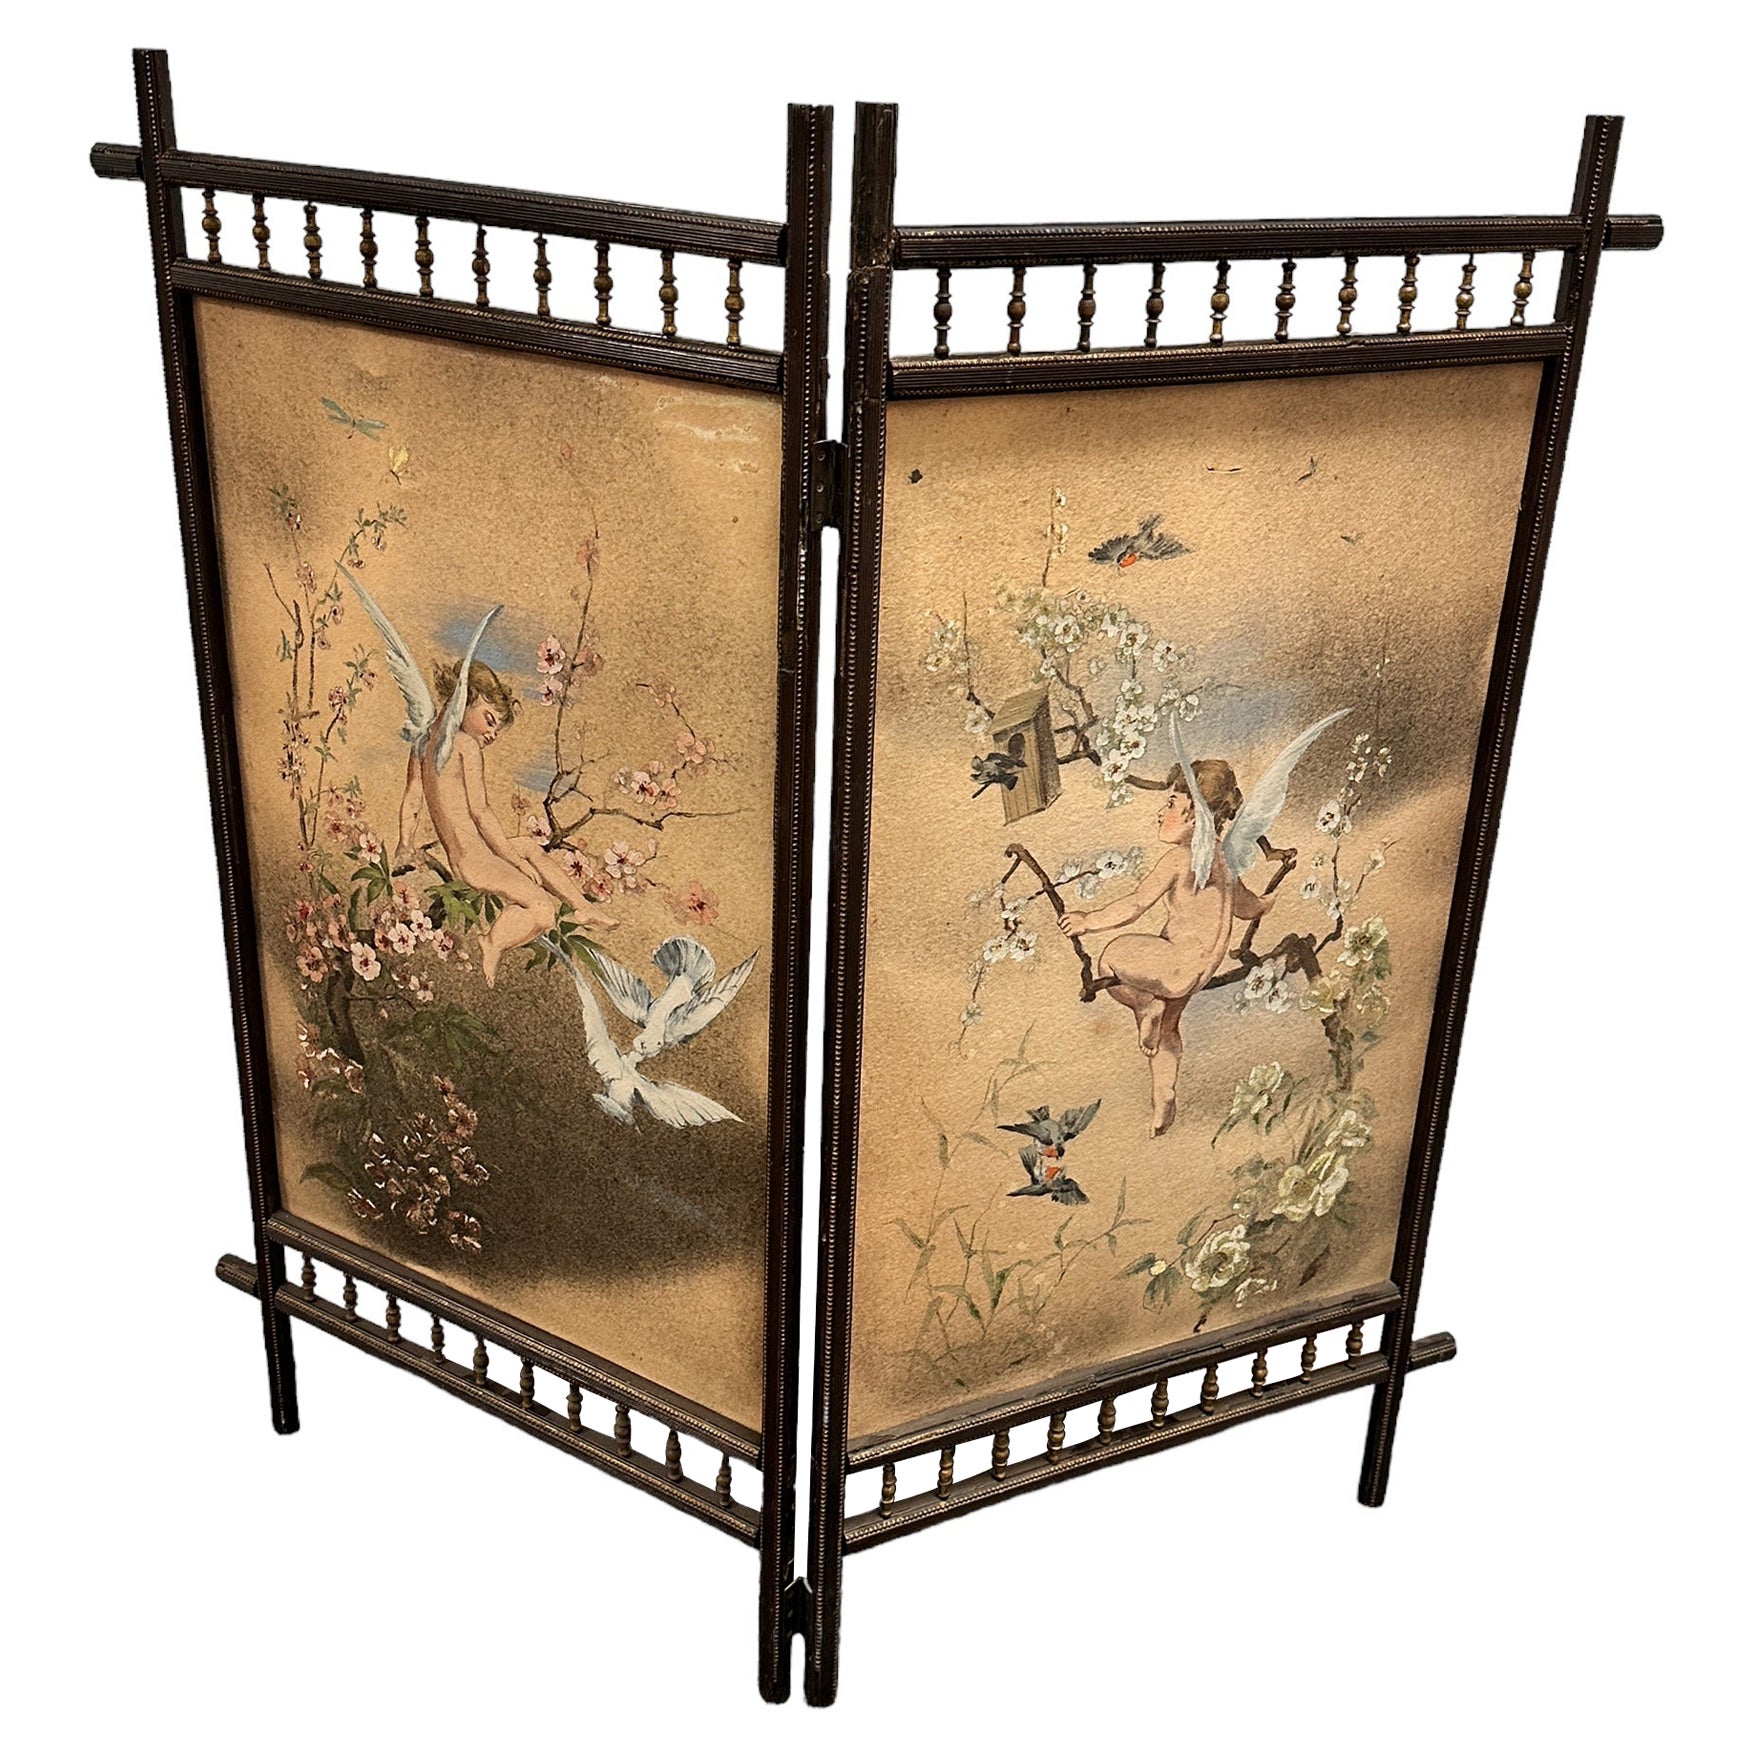 Antique Two Panel Screen Hand Painted on Fabric and Wood, Early 1900s For Sale